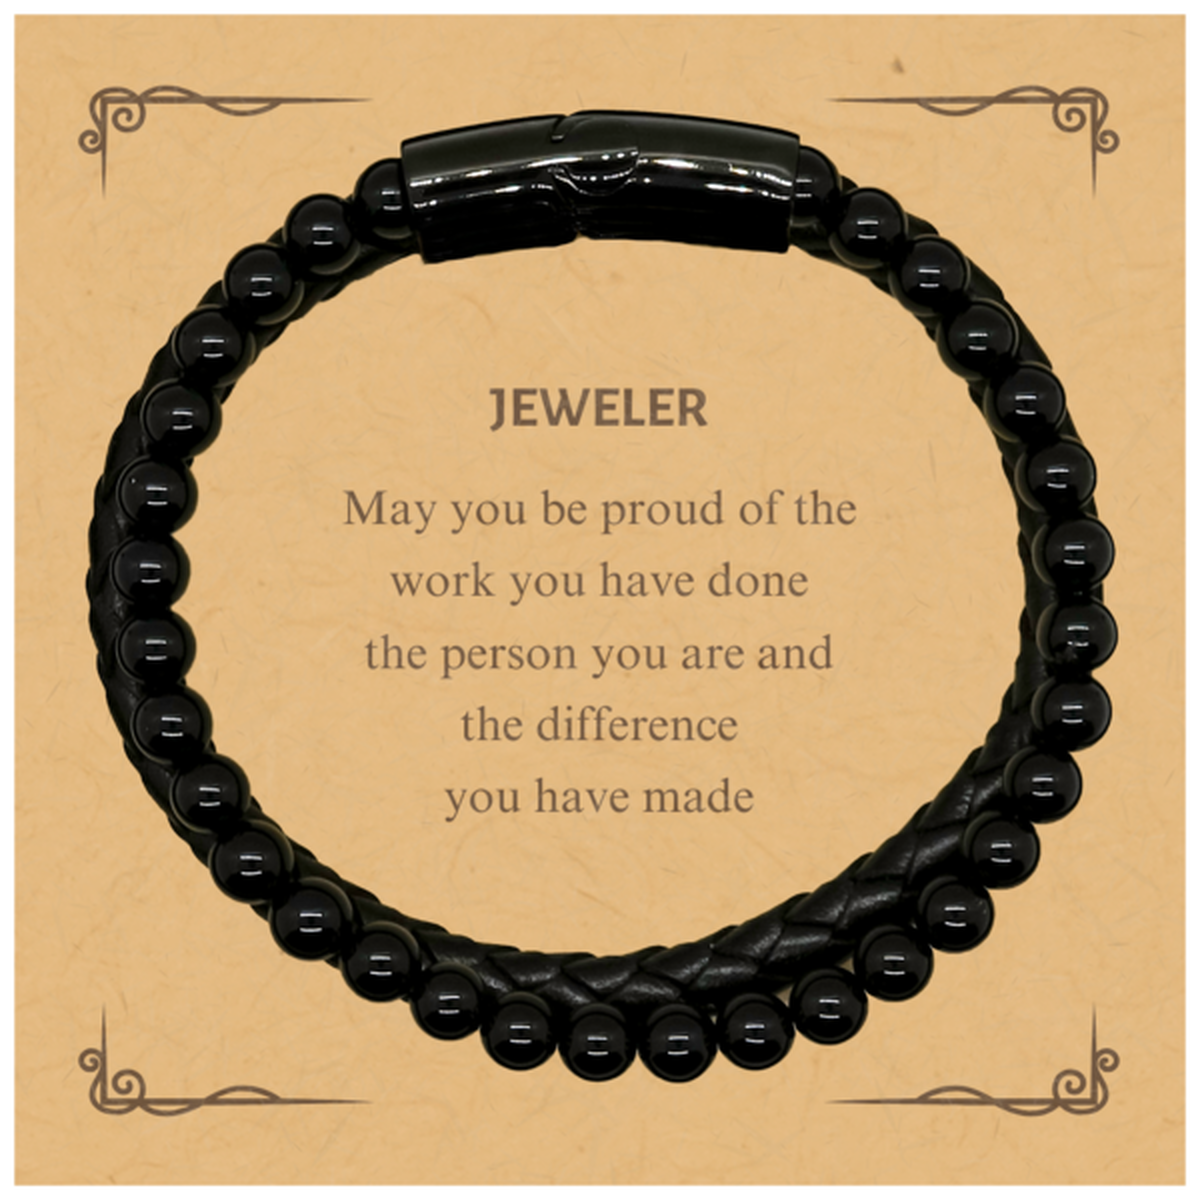 Jeweler May you be proud of the work you have done, Retirement Jeweler Stone Leather Bracelets for Colleague Appreciation Gifts Amazing for Jeweler